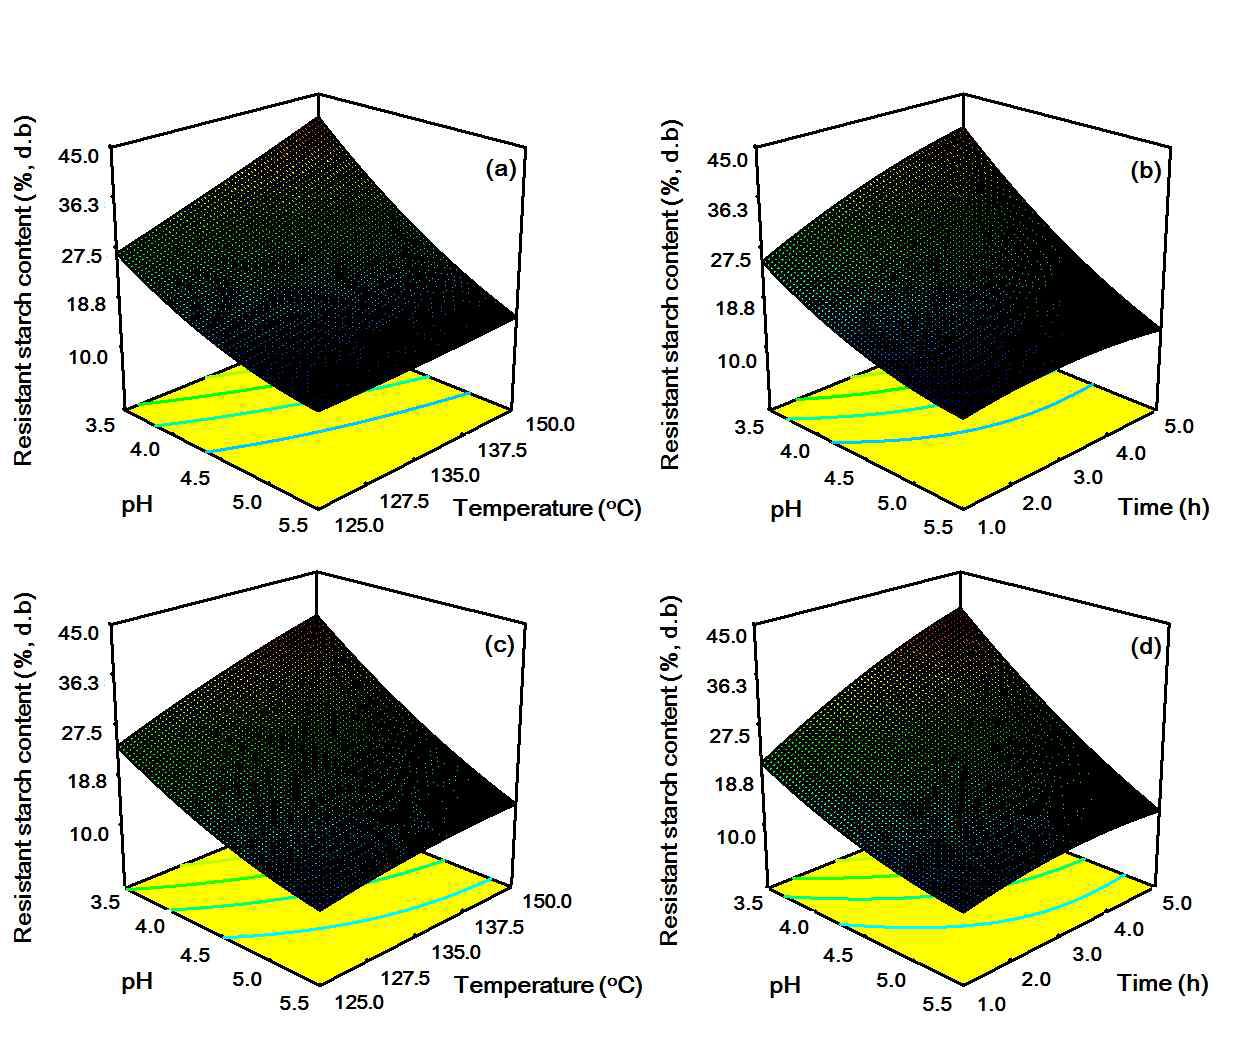 Response surface plots describing the interaction between pH and temperature and pH and time on resistant starch contents in uncooked (a & b) and cooked (c & d) states of citrate starch from waxy corn starch.